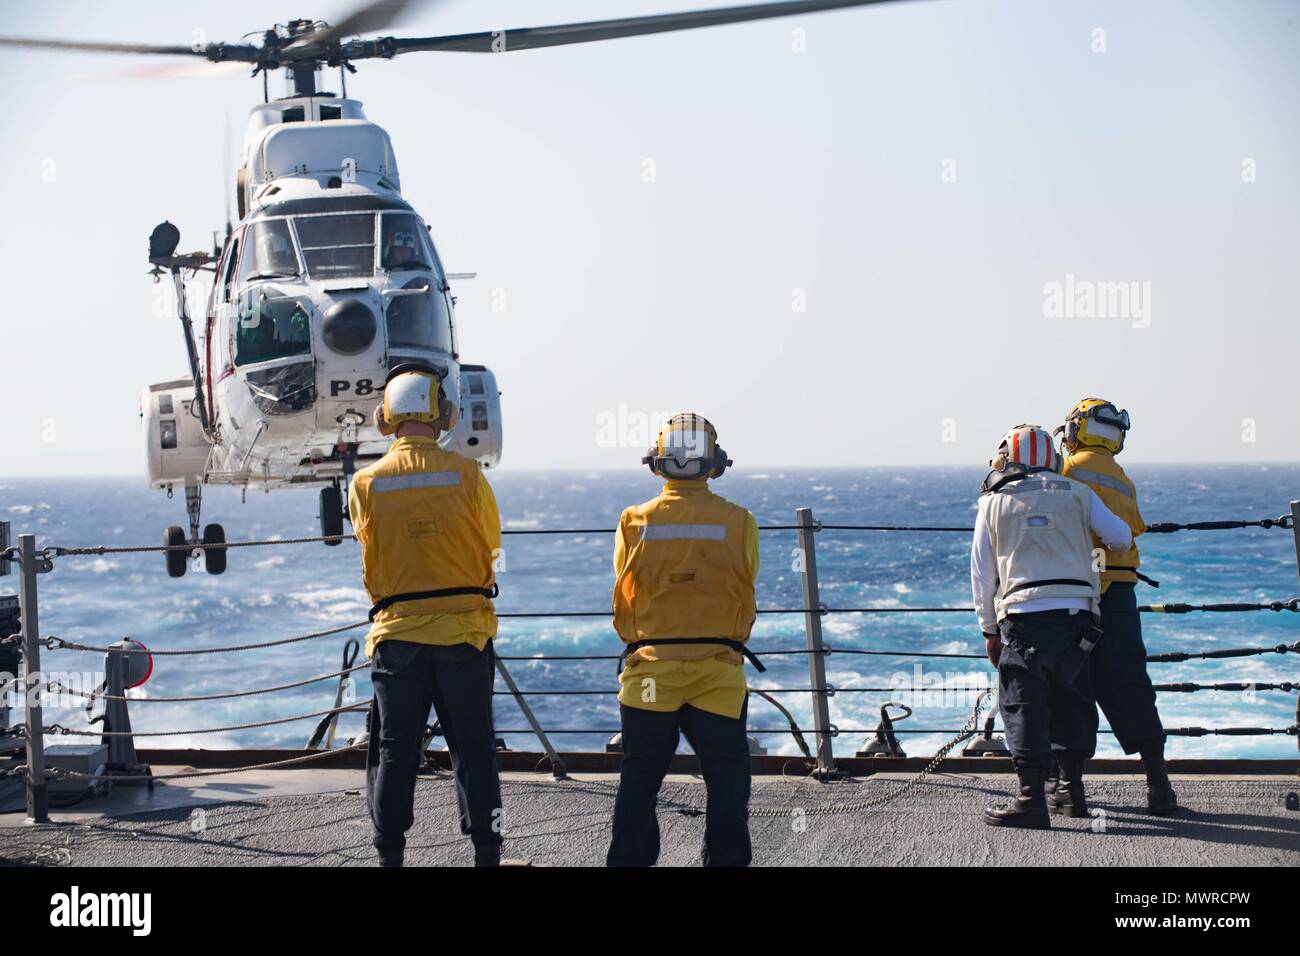 180516-N-AV754-0107 U.S. 5TH FLEET AREA OF OPERATIONS (May 16, 2018) Sailors aboard the Arleigh Burke-class guided-missile destroyer USS Winston S. Churchill (DDG 81) guide a Eurocopter AS332 Super Puma during a replenishment-at-sea with the dry cargo and ammunition ship USNS Amelia Earhart (T-AKE 6). Winston S. Churchill is deployed to the U.S. 5th Fleet area of operations in support of maritime security operations to reassure allies and partners and preserve the freedom of navigation and the free flow of commerce in the region. (U.S. Navy photo by Mass Communication Specialist 3rd Class Evan Stock Photo